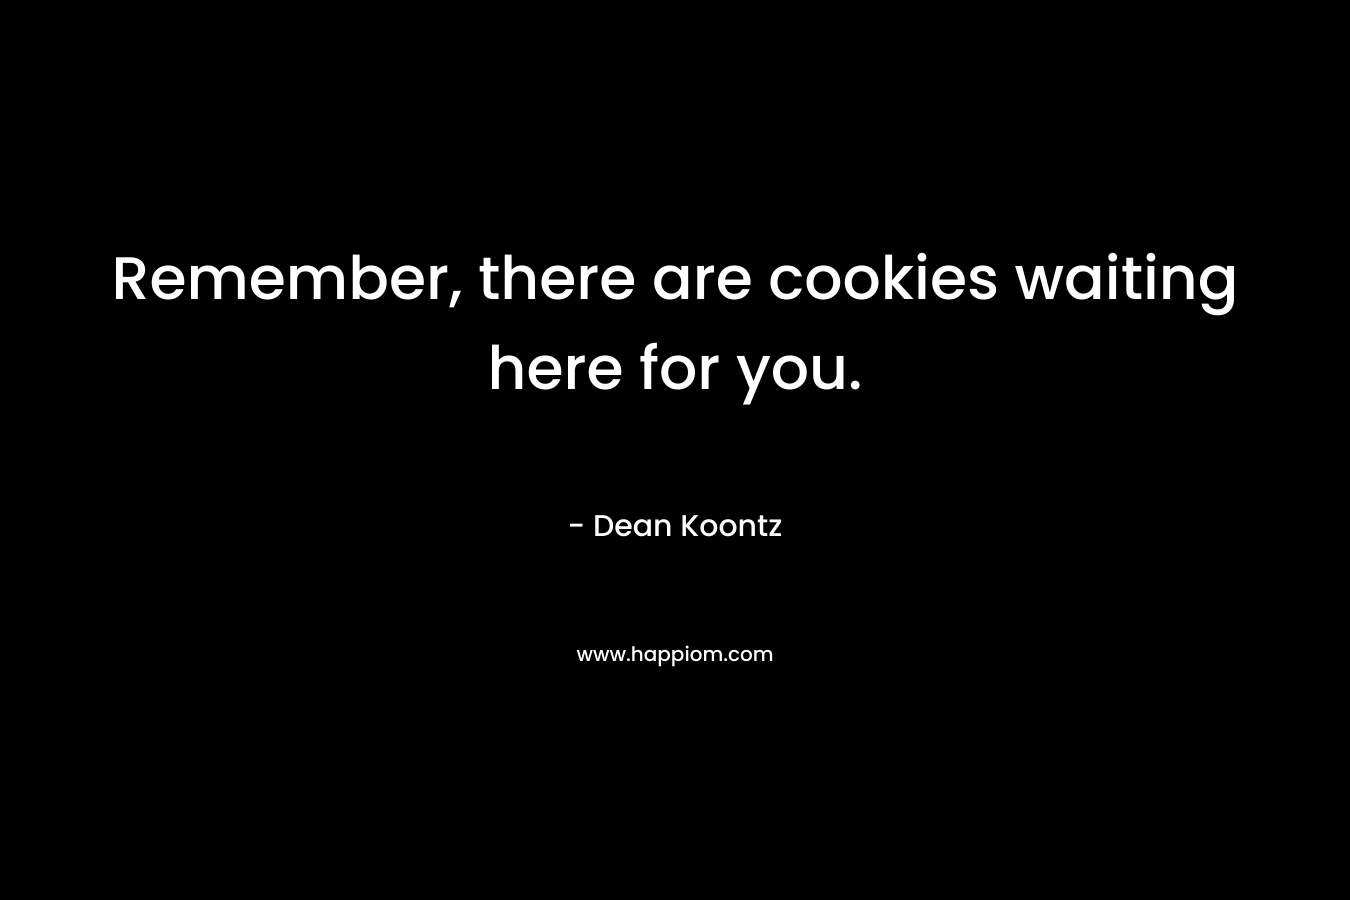 Remember, there are cookies waiting here for you.